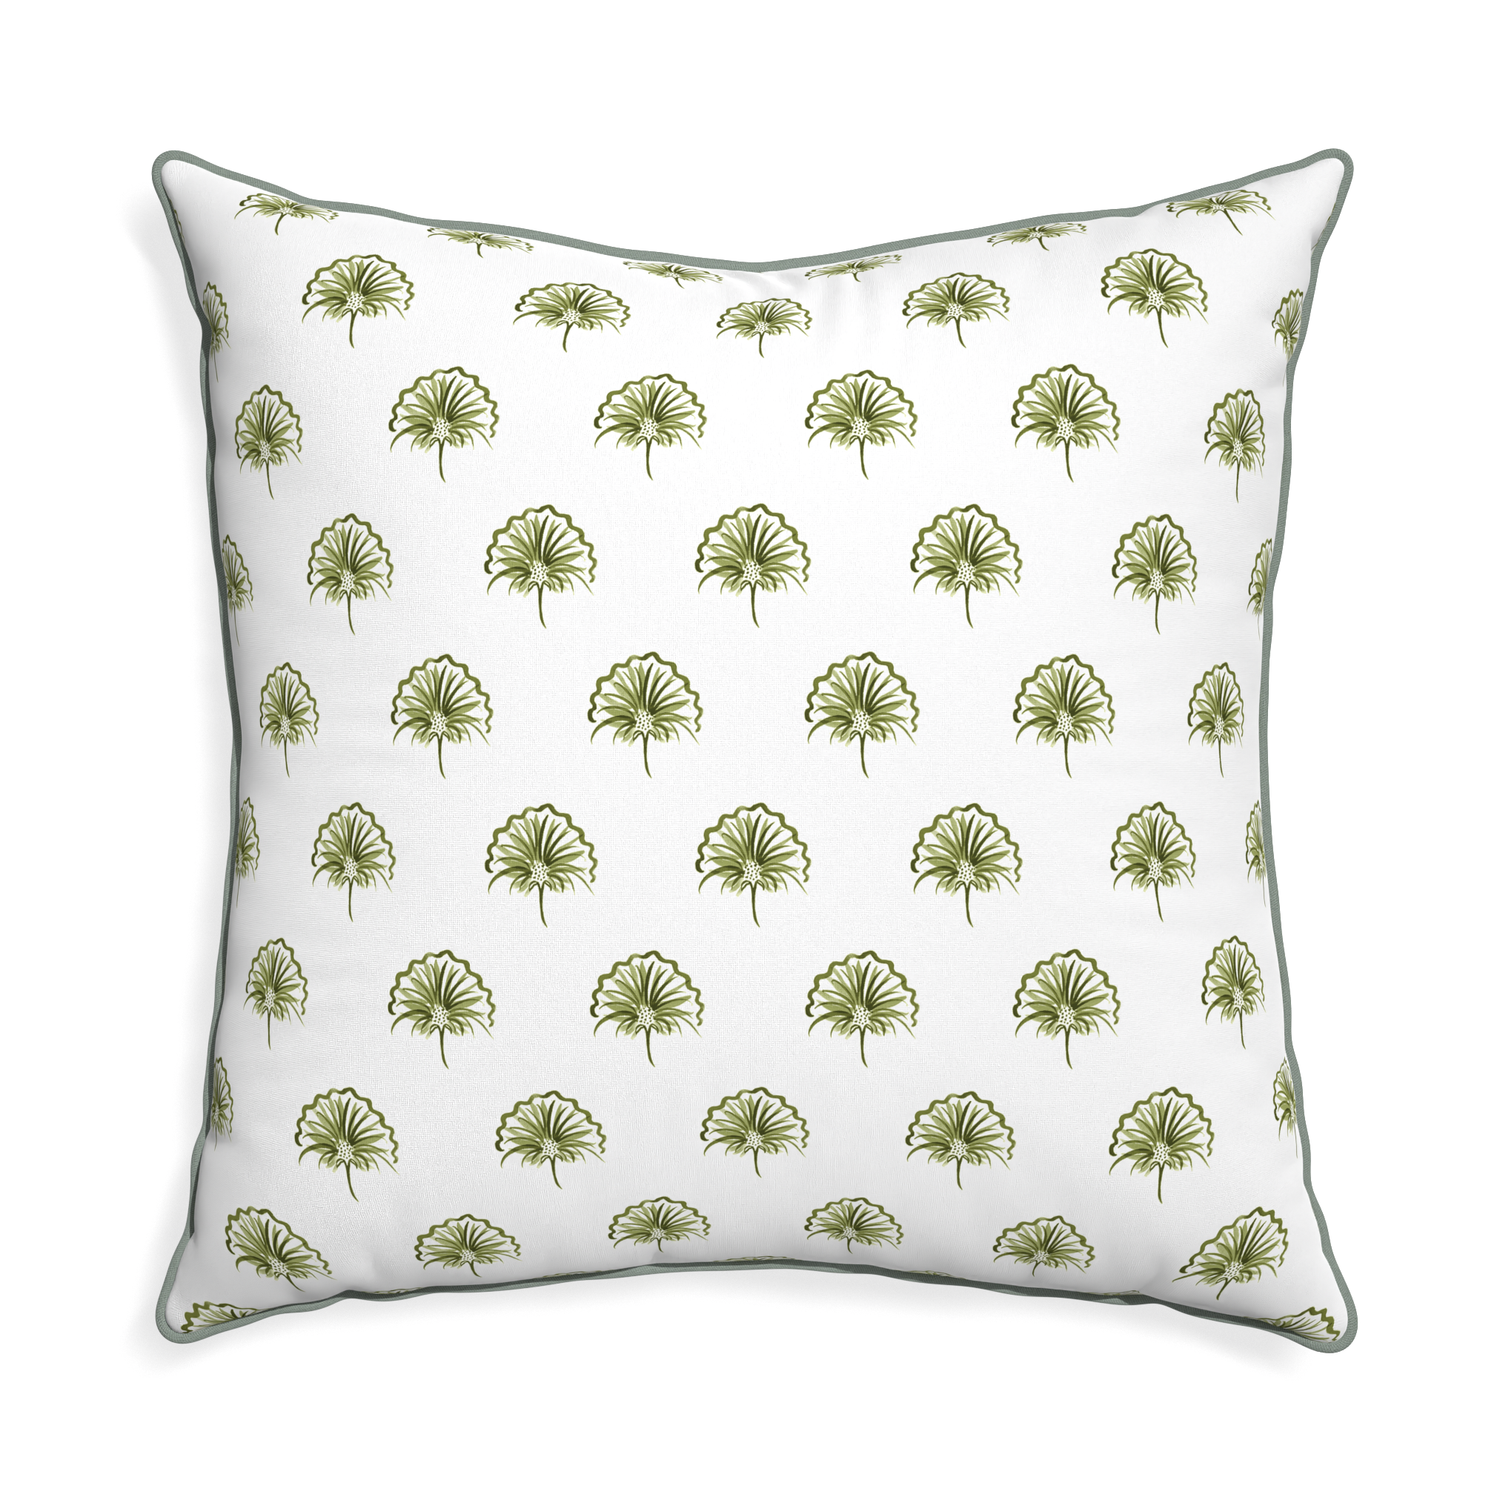 Euro-sham penelope moss custom green floralpillow with sage piping on white background